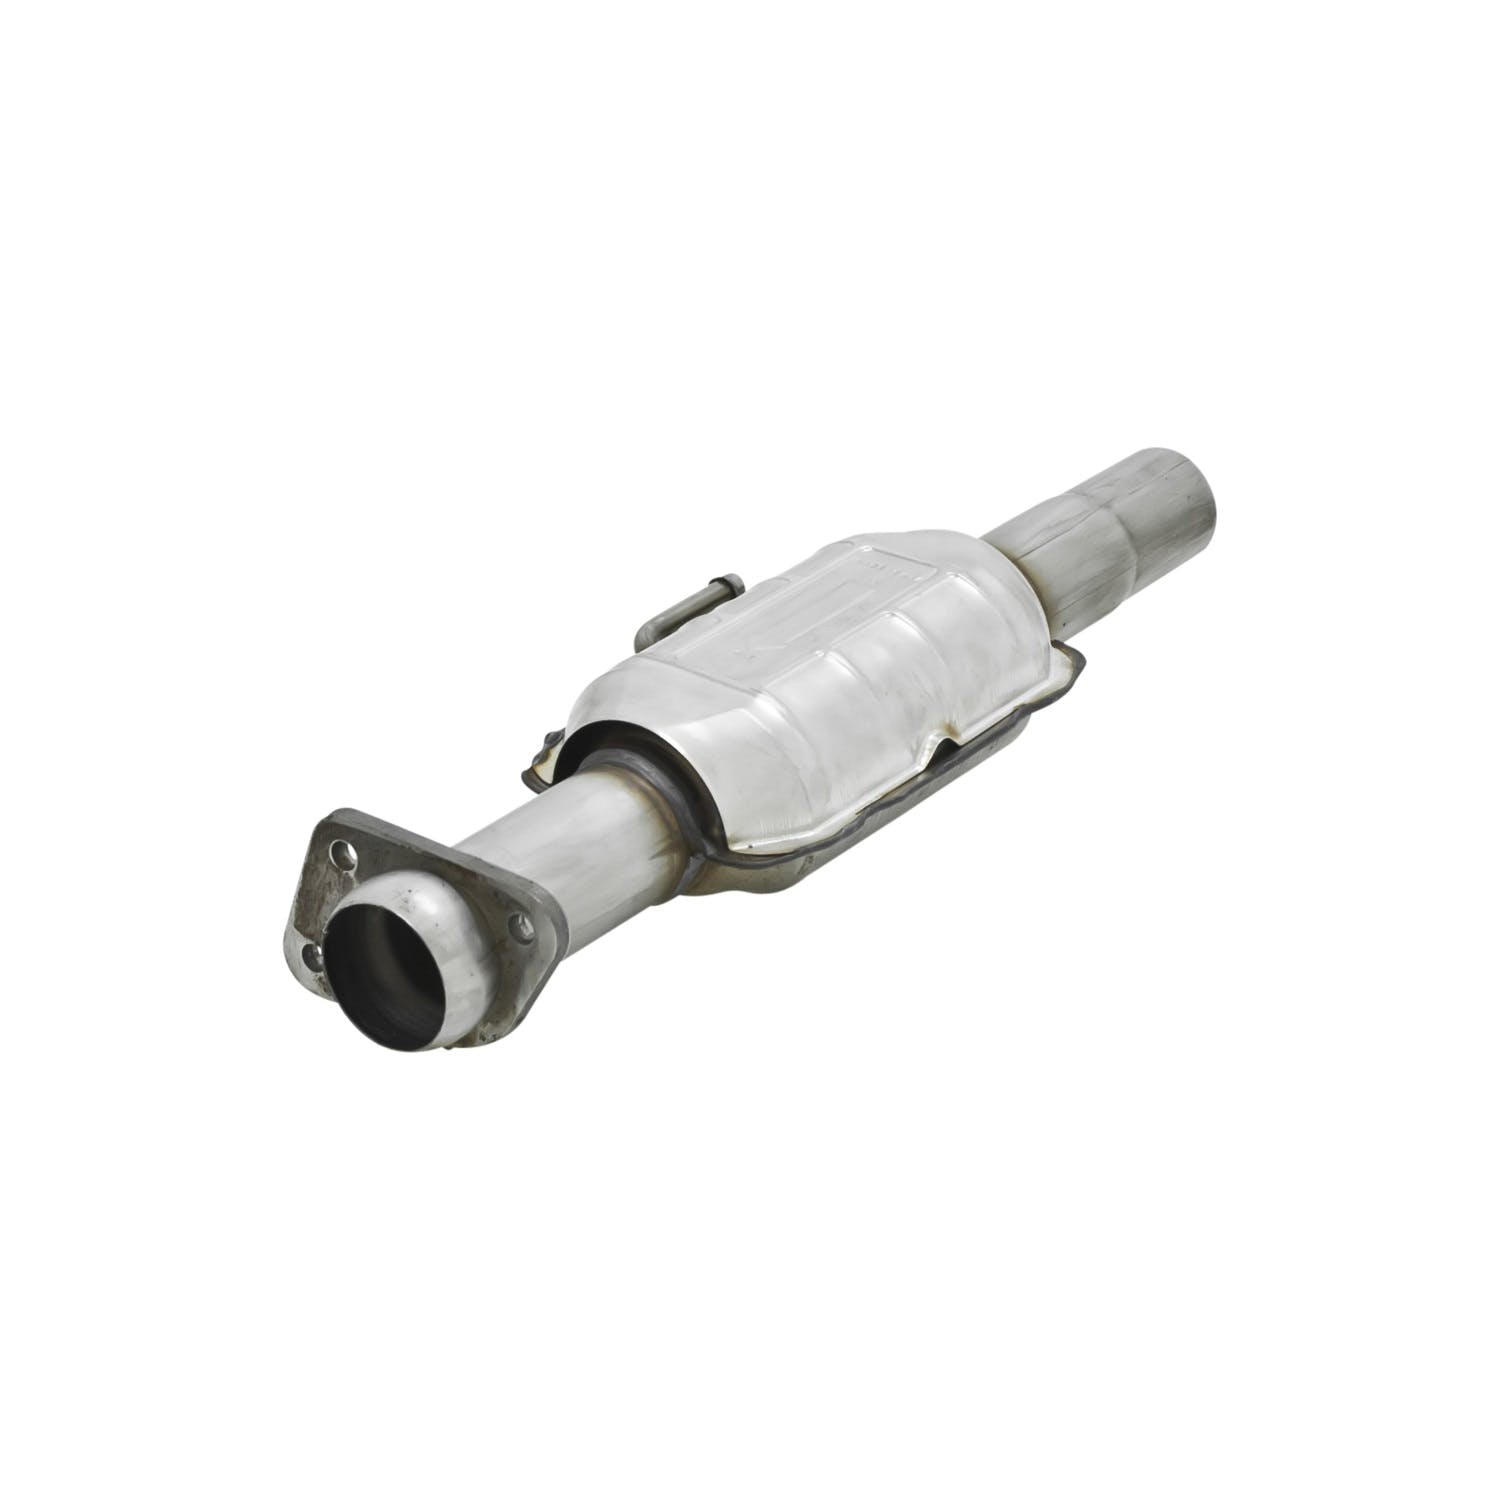 Flowmaster Catalytic Converters 2010001 Catalytic Converter-Direct Fit-2.50 in. Inlet/Outlet-49 State